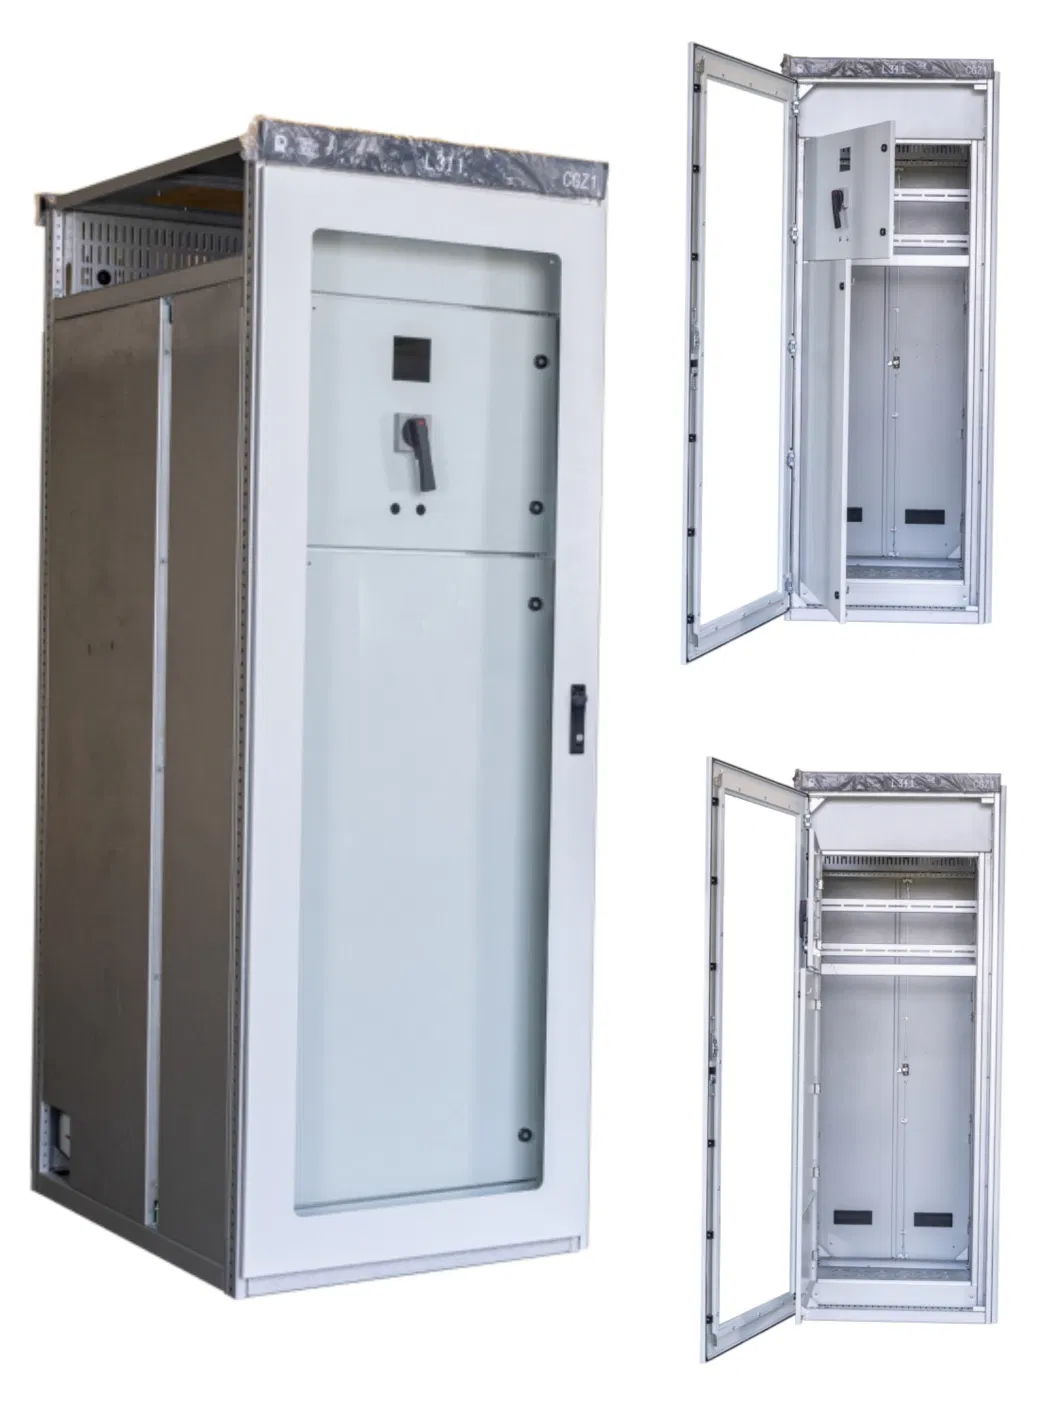 Kyn28-12 10kv Middle Voltage Switchgear Electrical Cabinet Electrical Enclosure